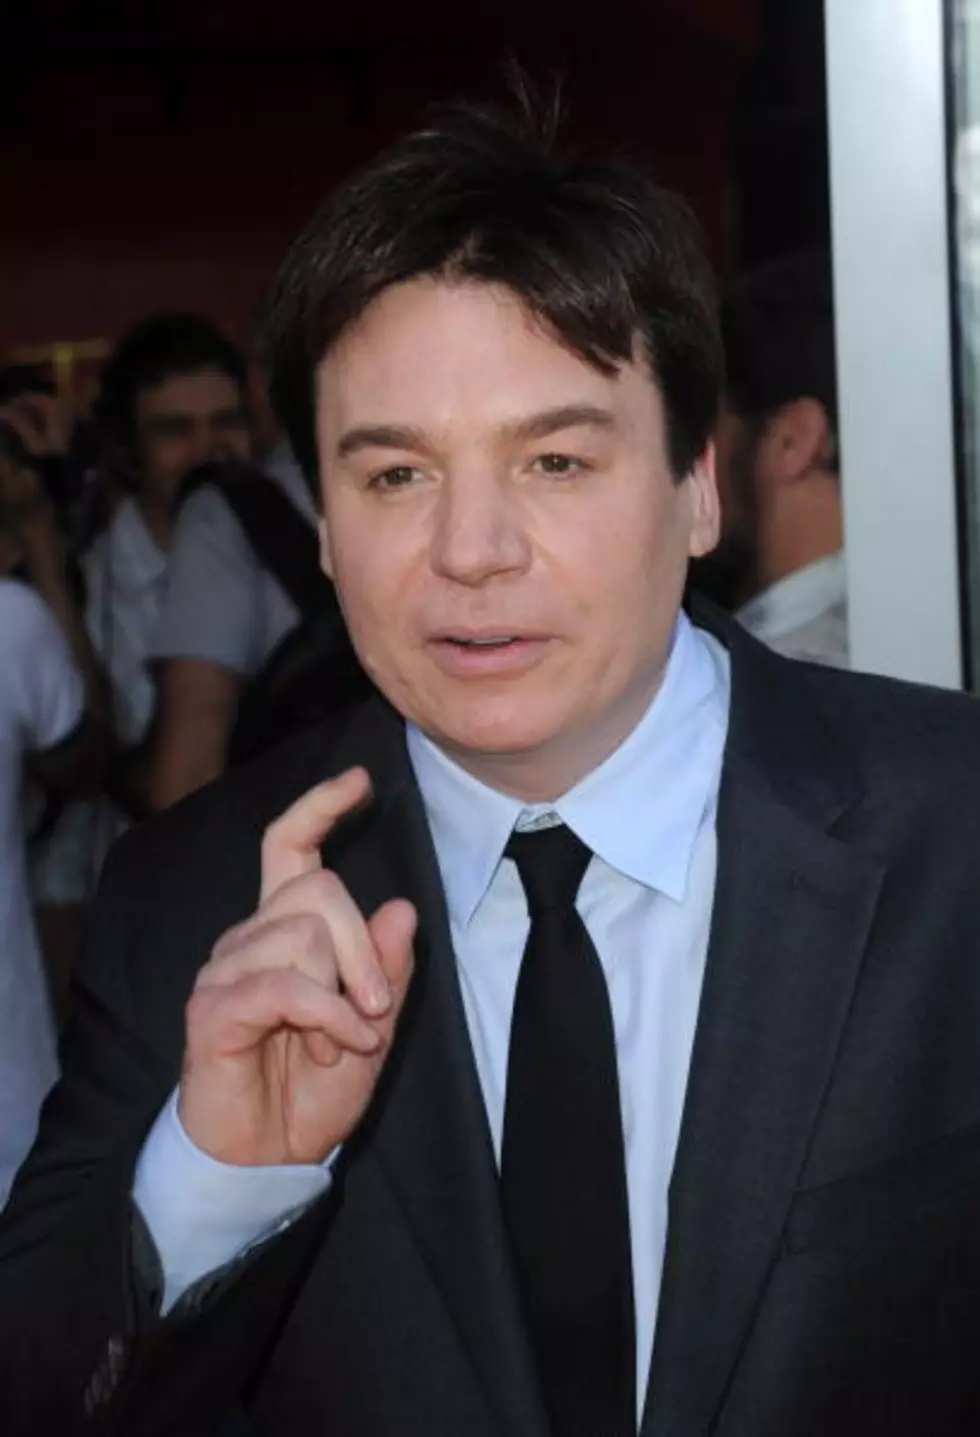 Wednesday&#8217;s Celebrity Birthdays Include Mike Myers, Yeah baby!